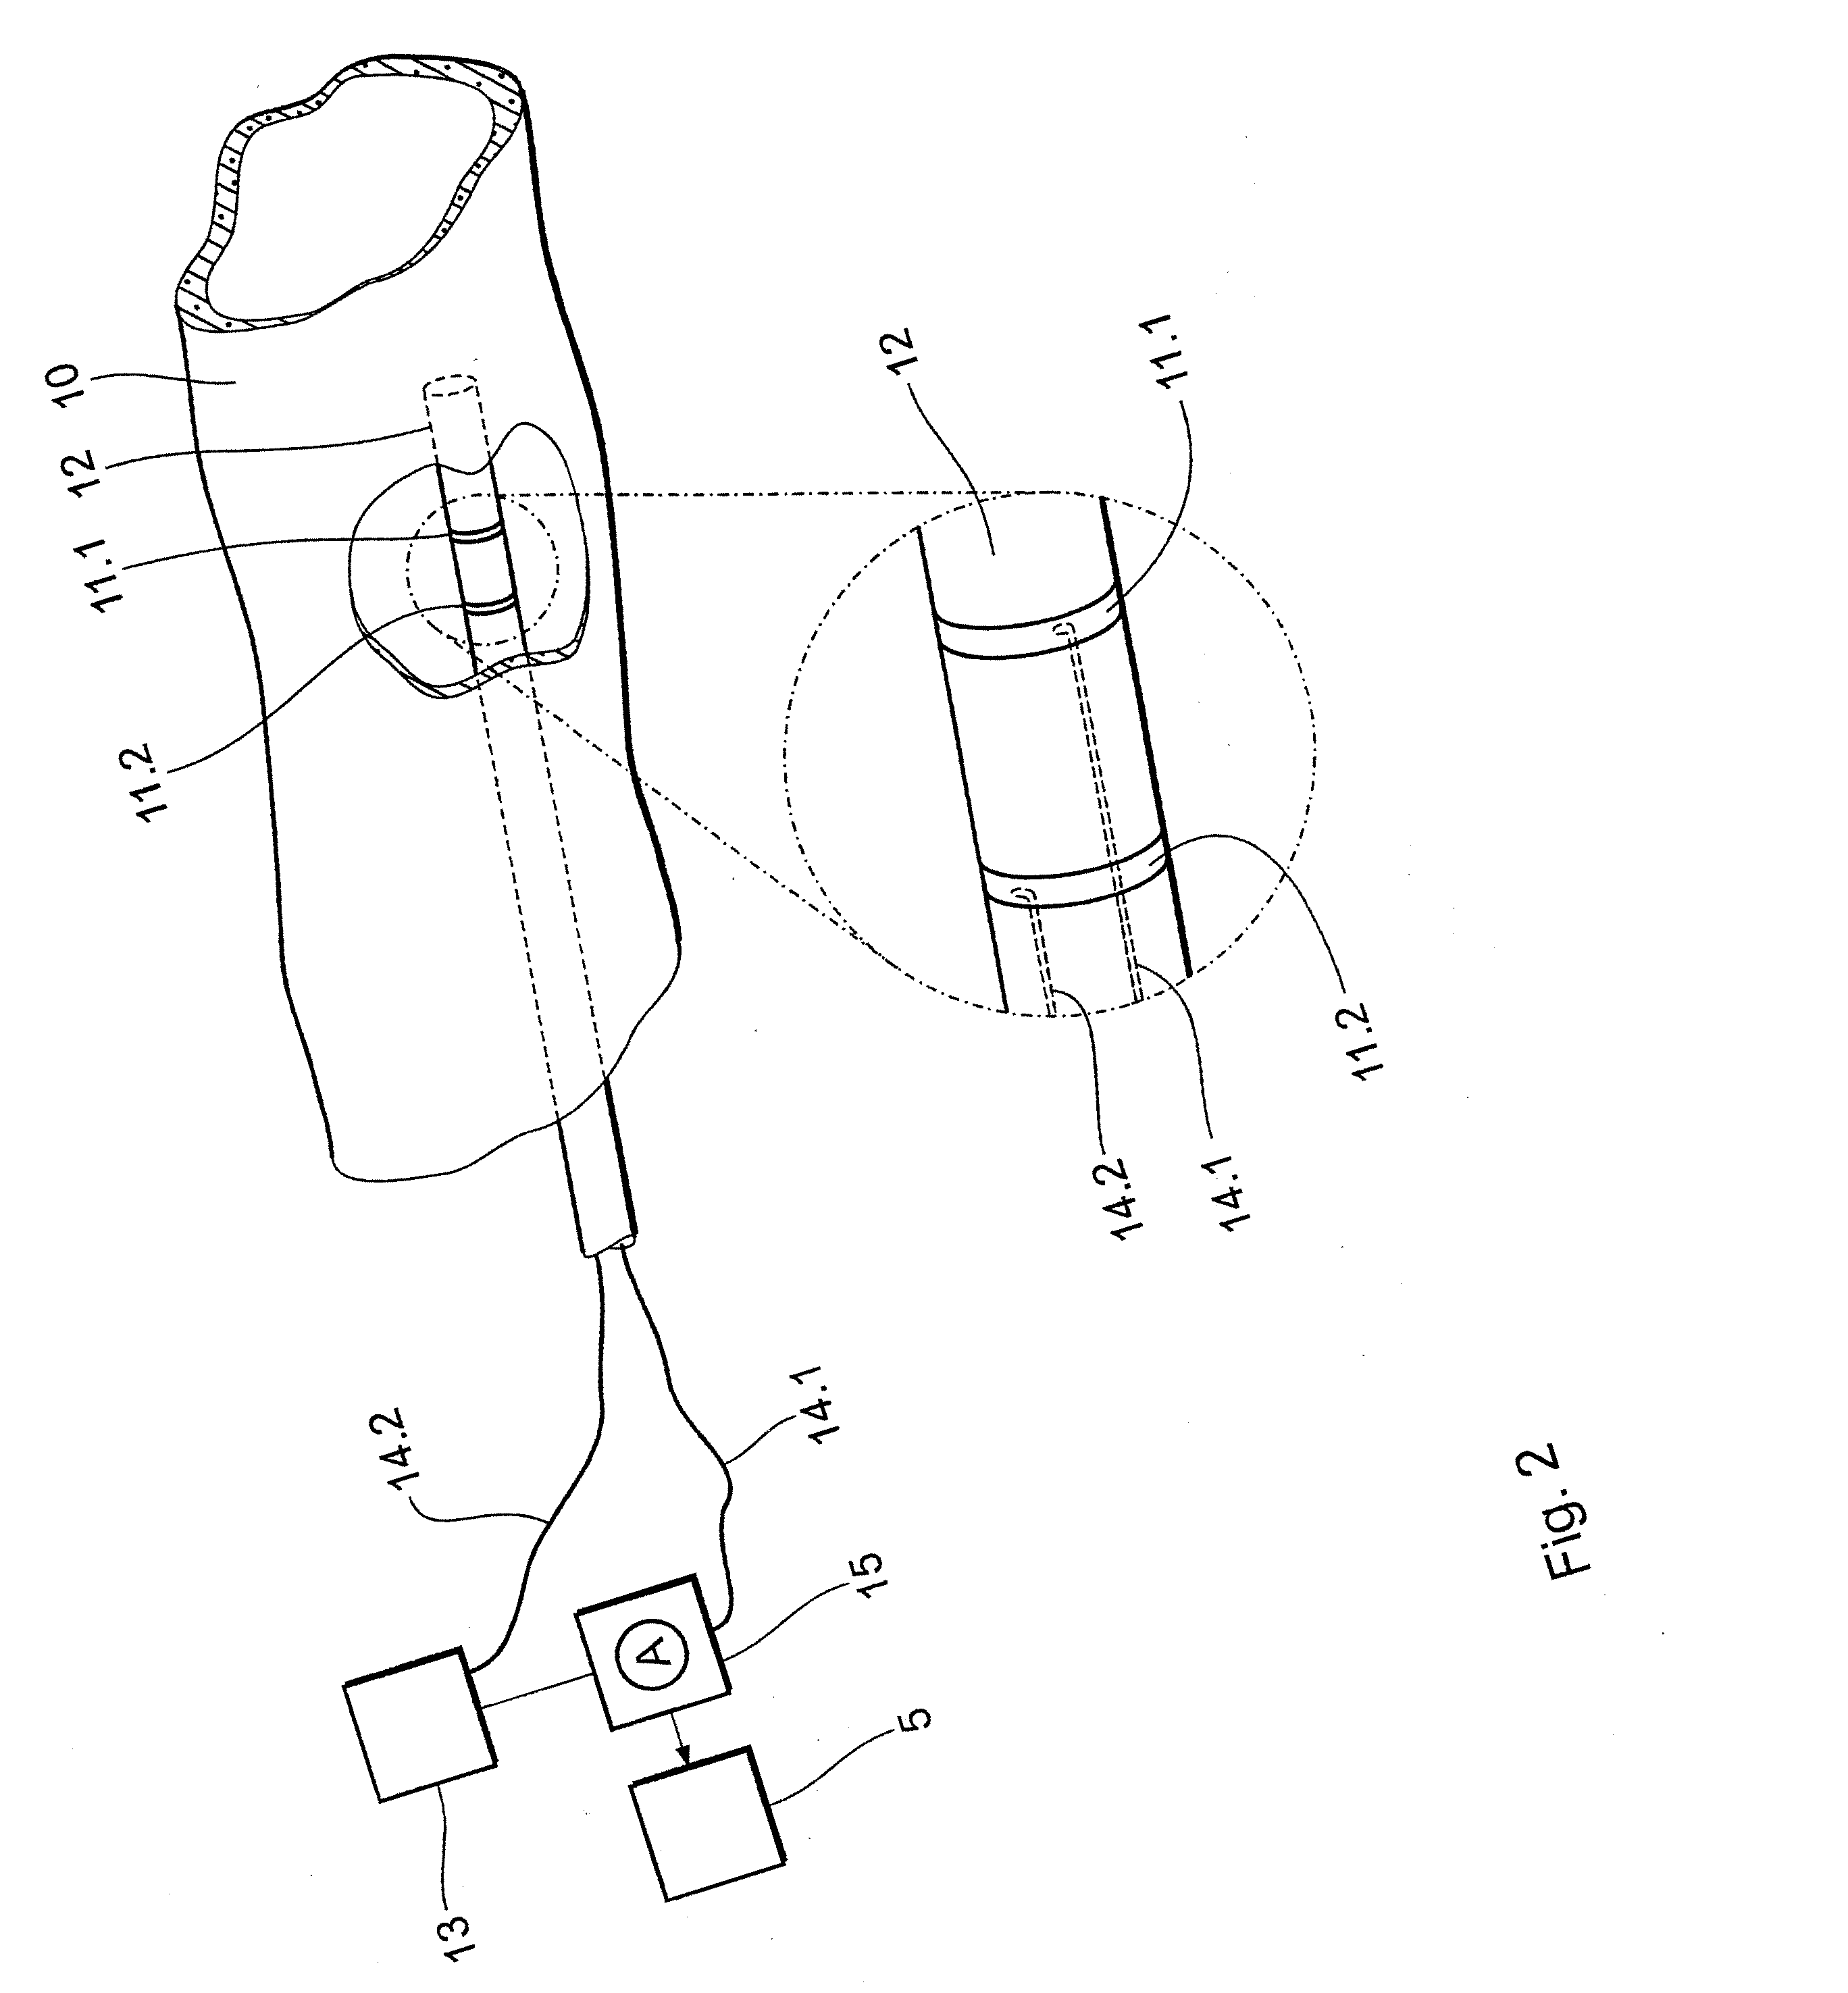 Electrical therapy device